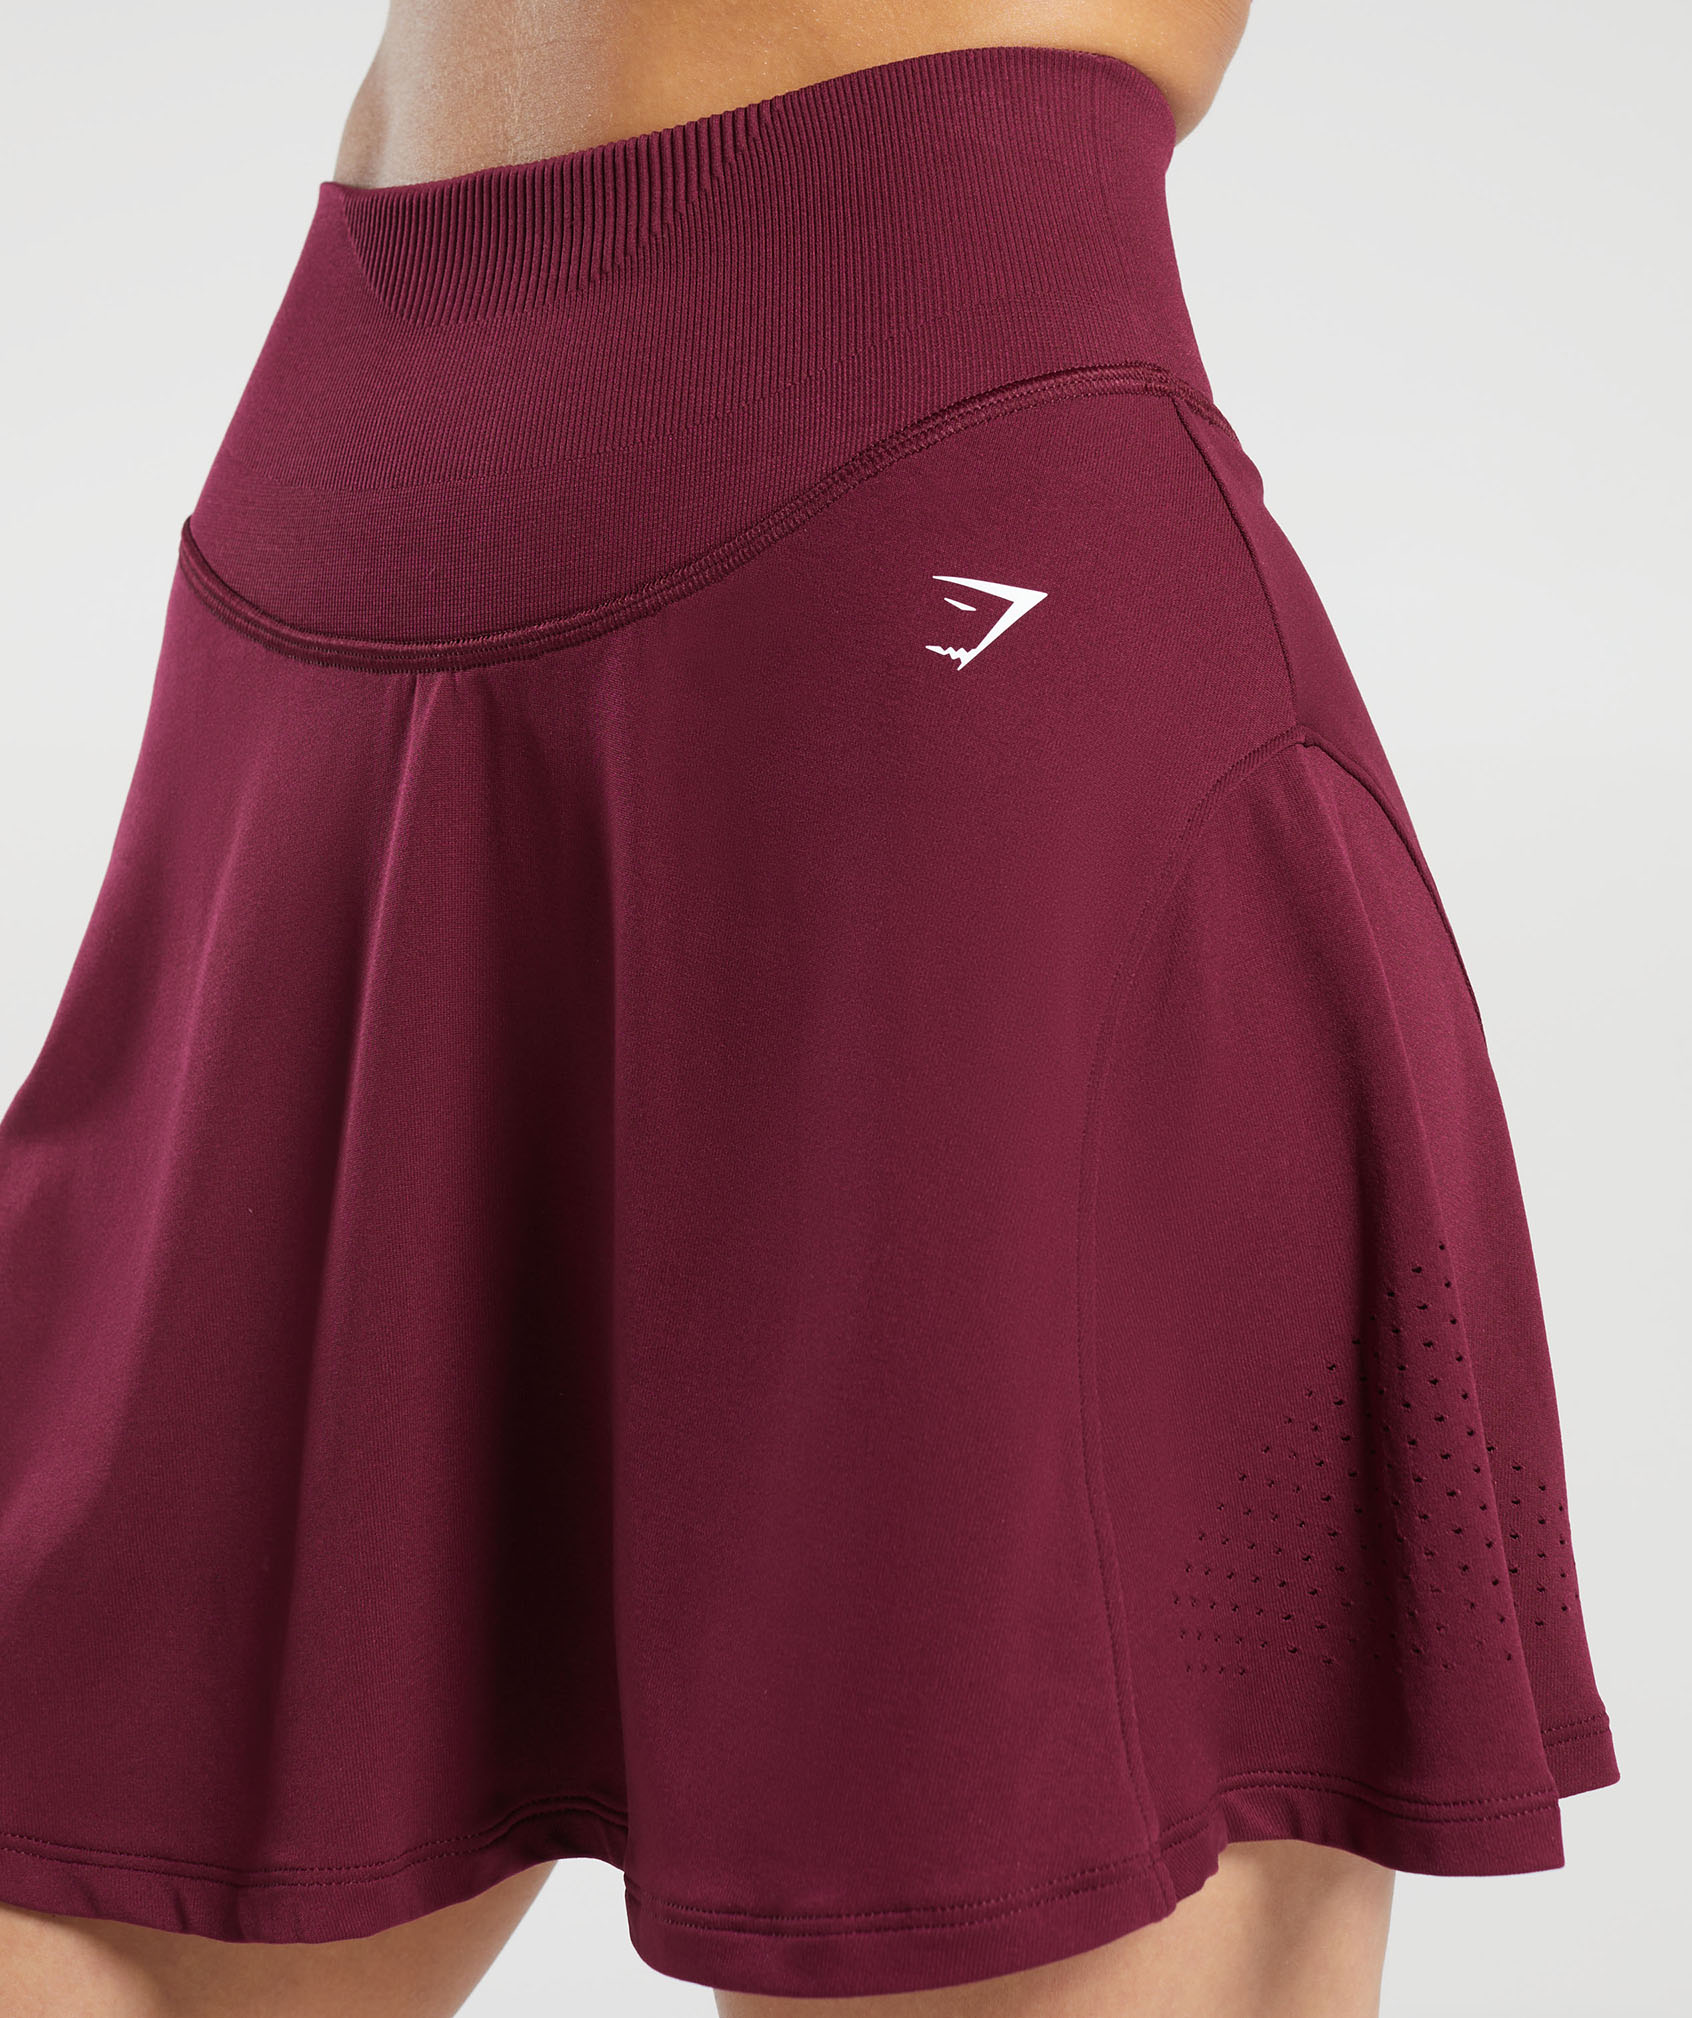 How To Style A Tennis Skirt: 6 Tennis Skirt Outfit Ideas